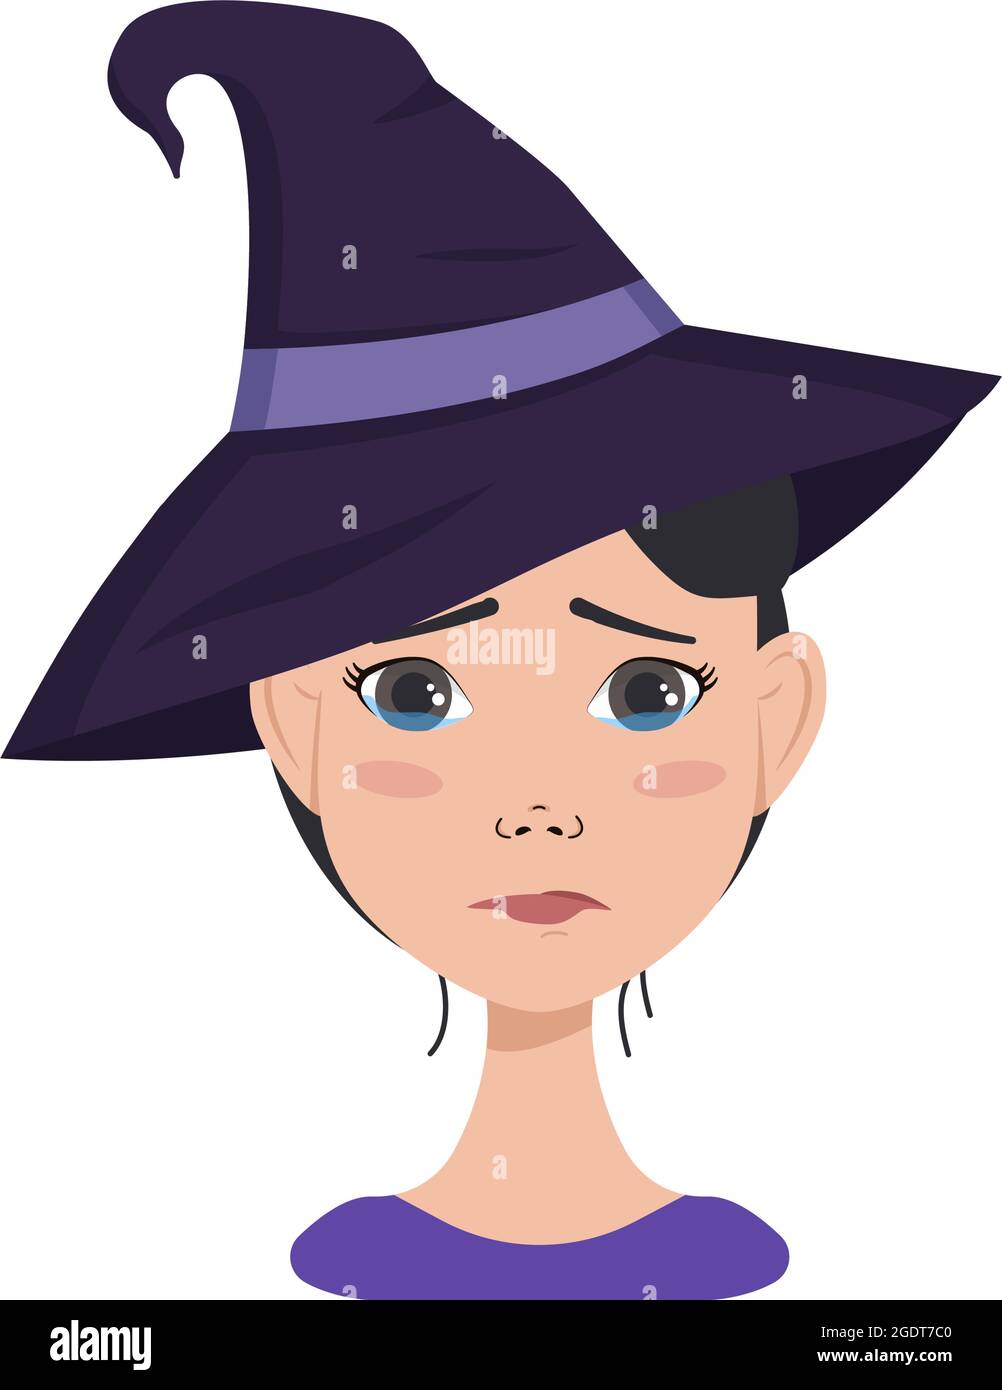 Avatar of asian woman with dark hair, sad emotions, crying face and tears, wearing a witch hat. Halloween character in costume Stock Vector